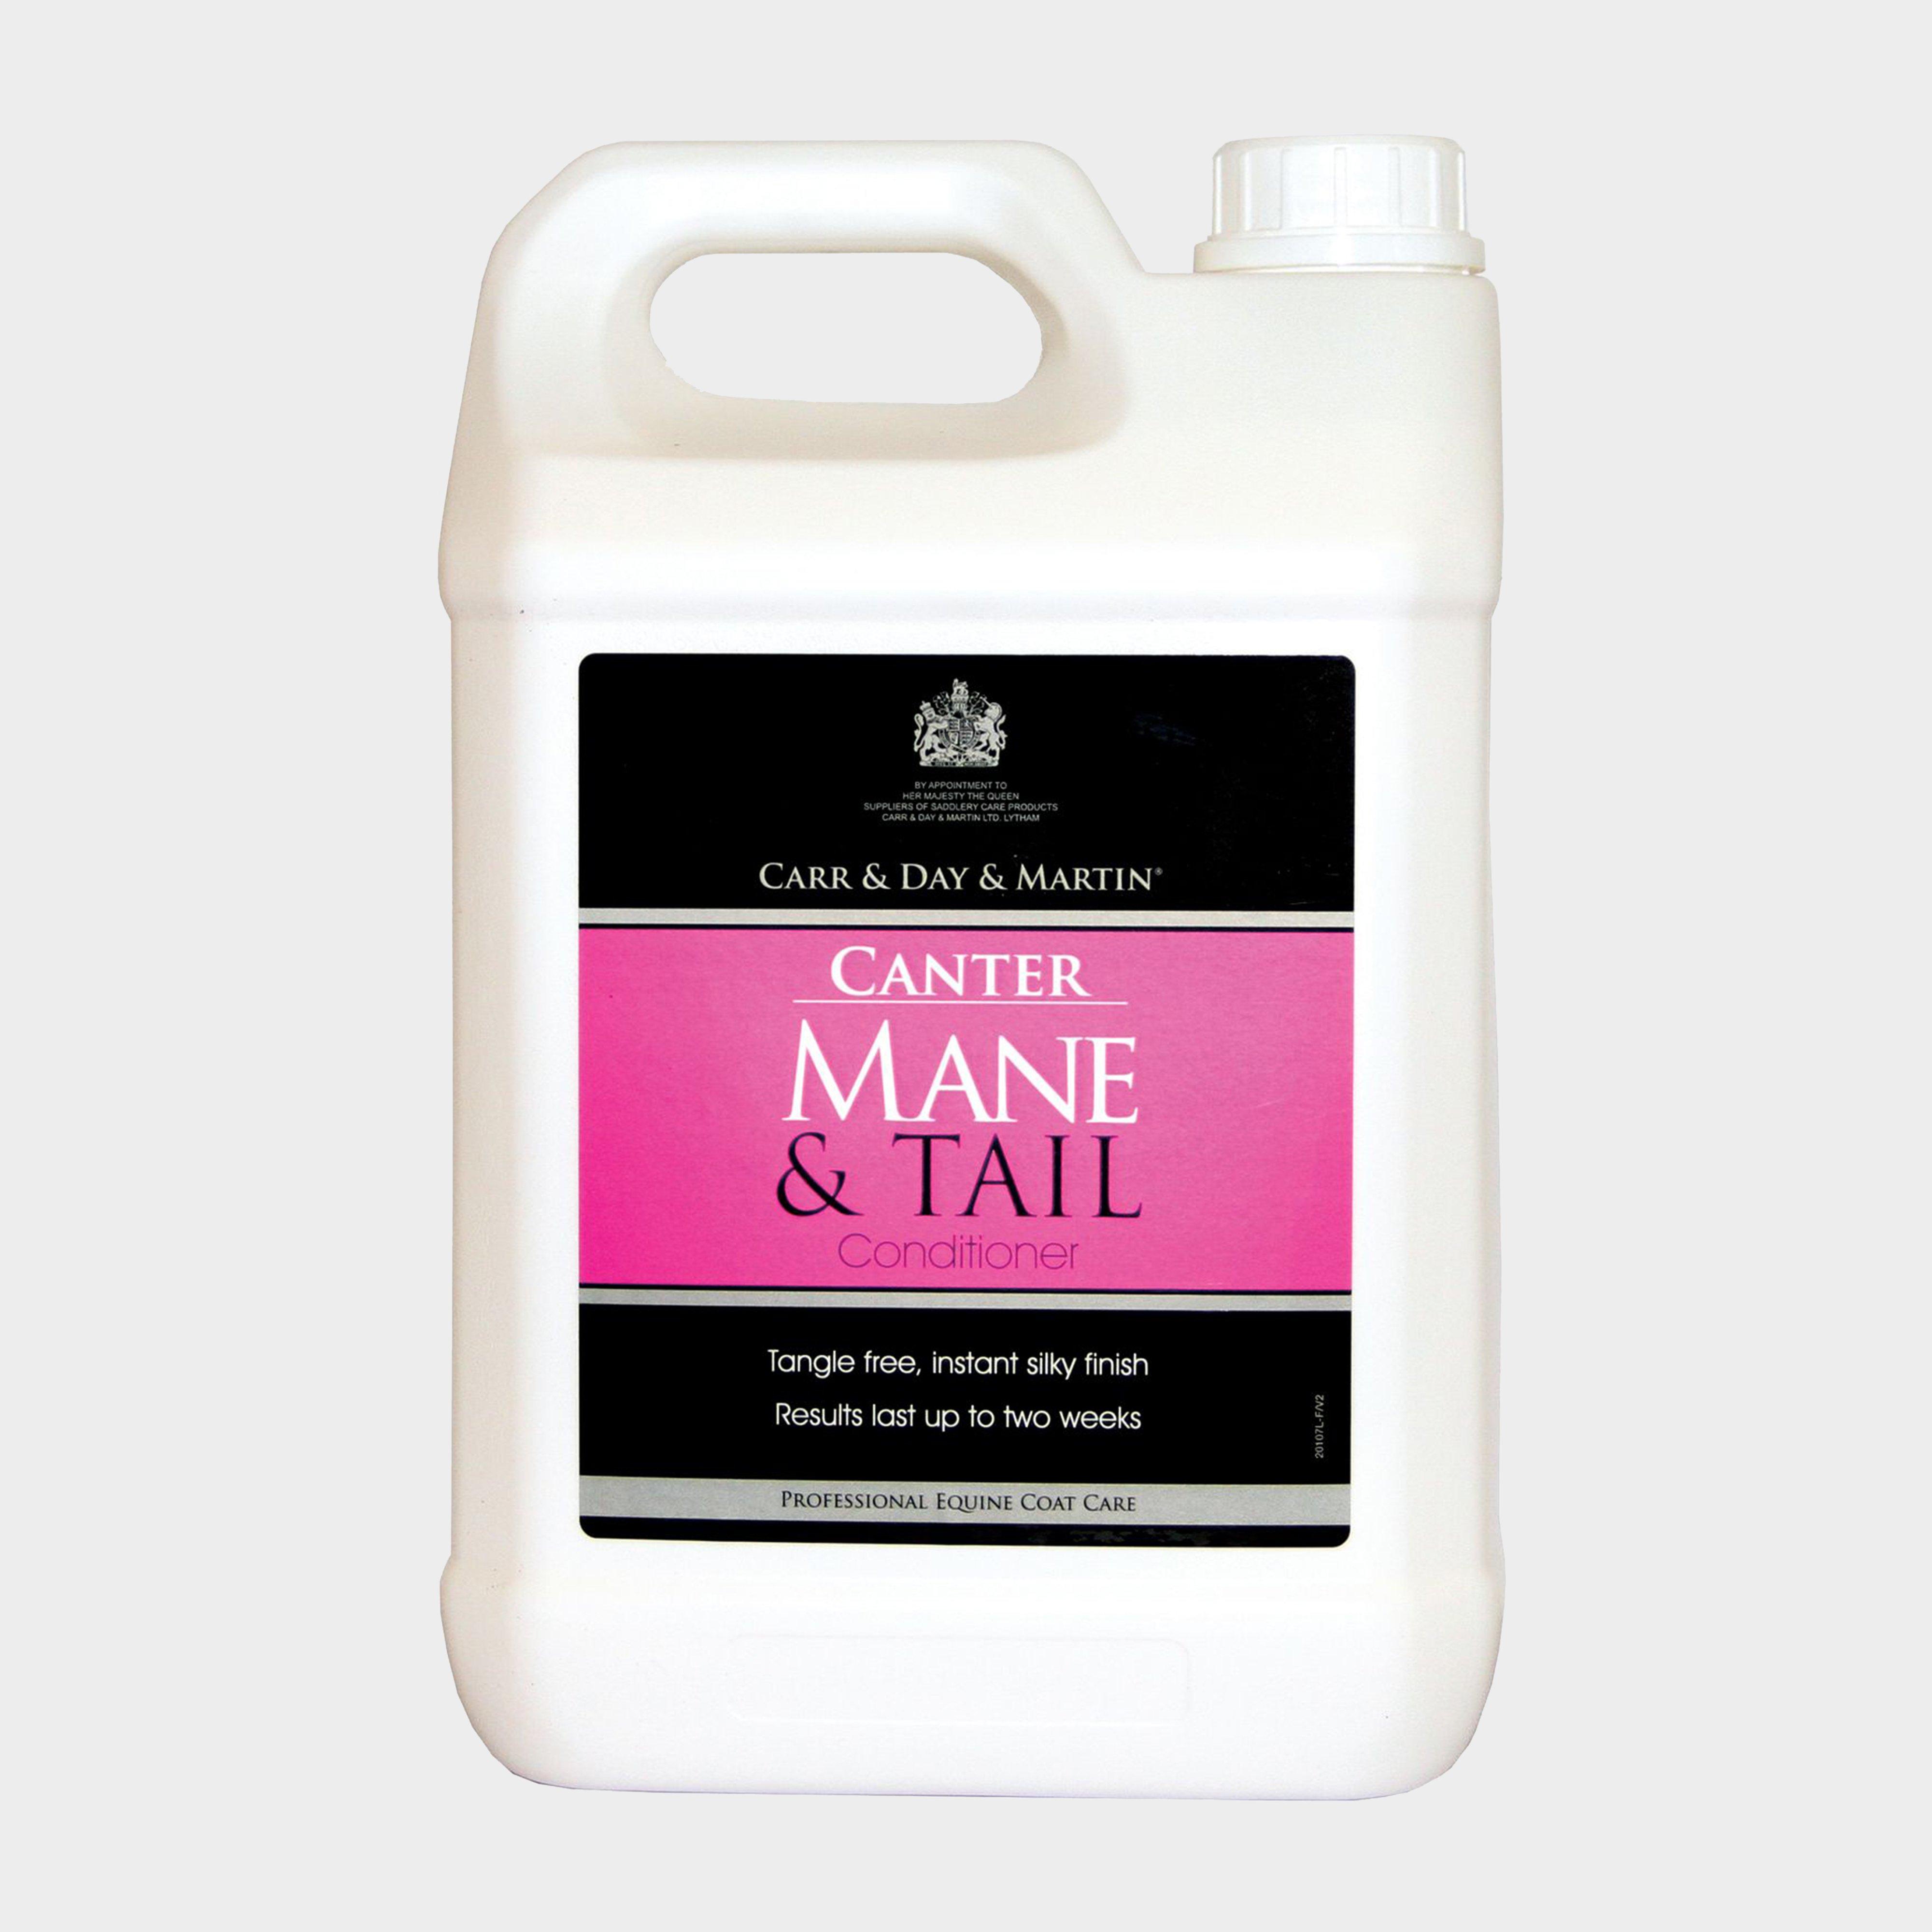  Carr and Day and Martin Canter Mane & Tail Conditioner Refill, Black